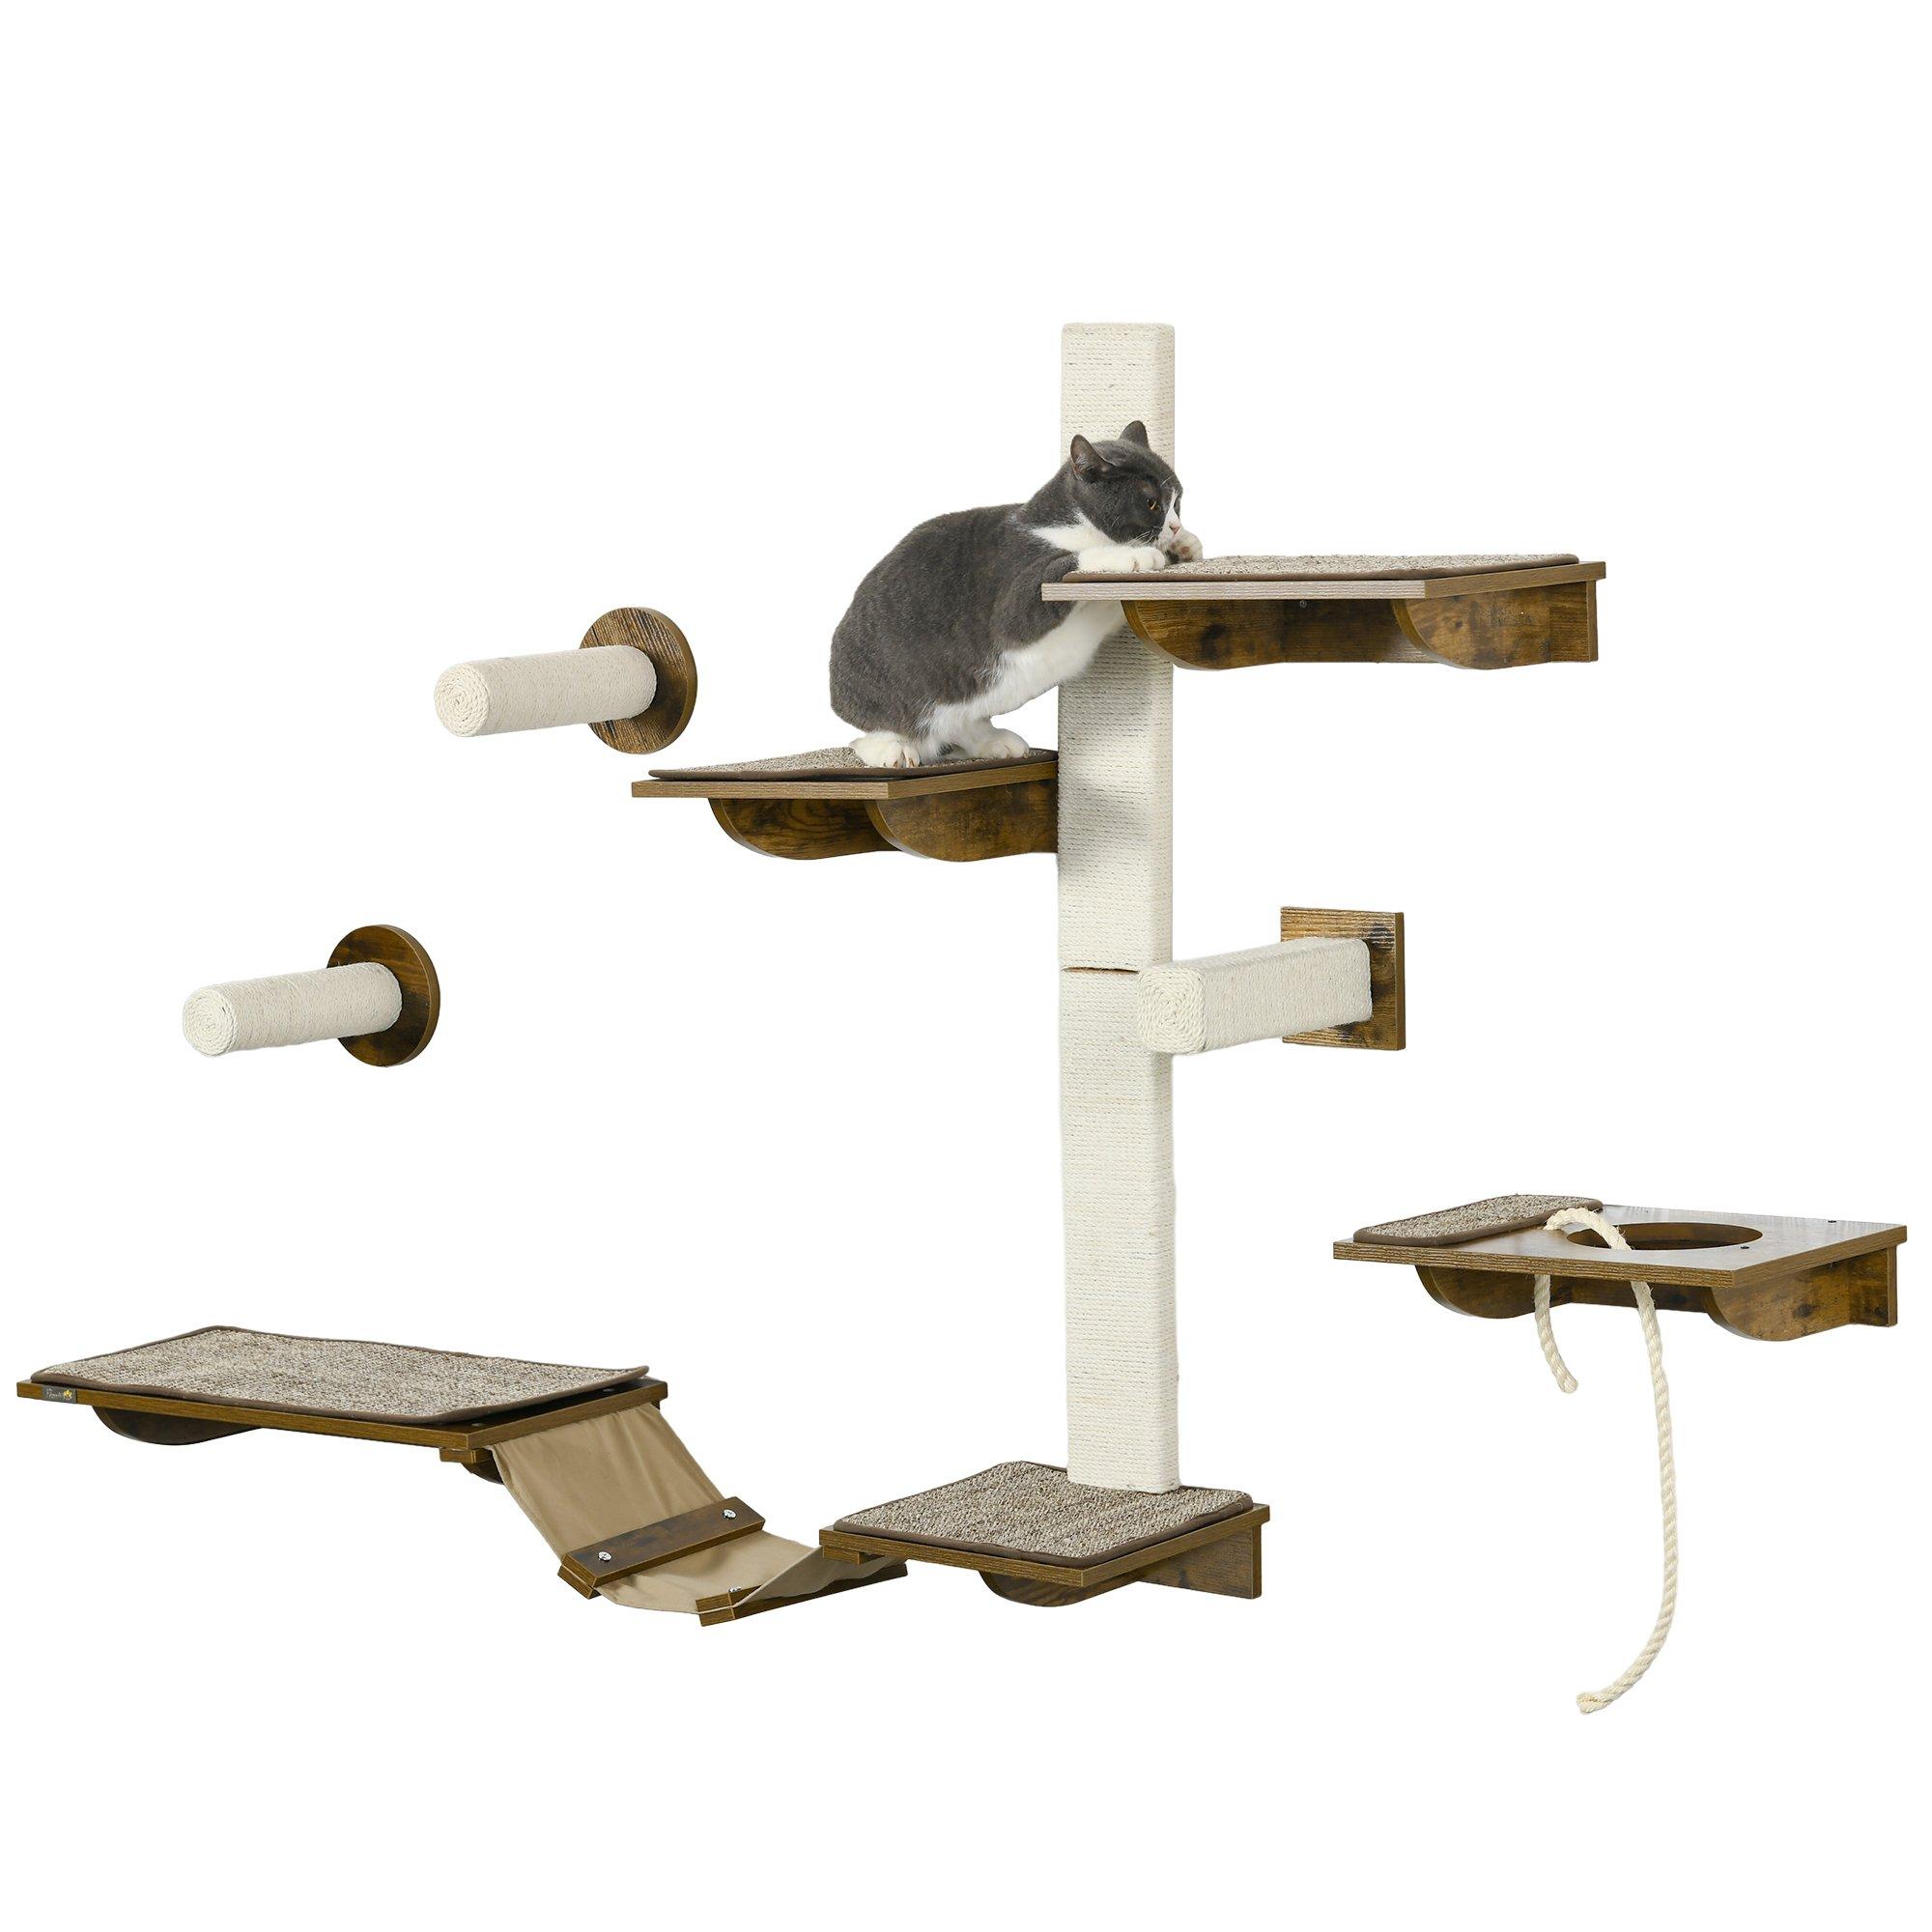 8Pcs Cat Shelves with Scratching Posts, Perches, Ladder for Sleeping